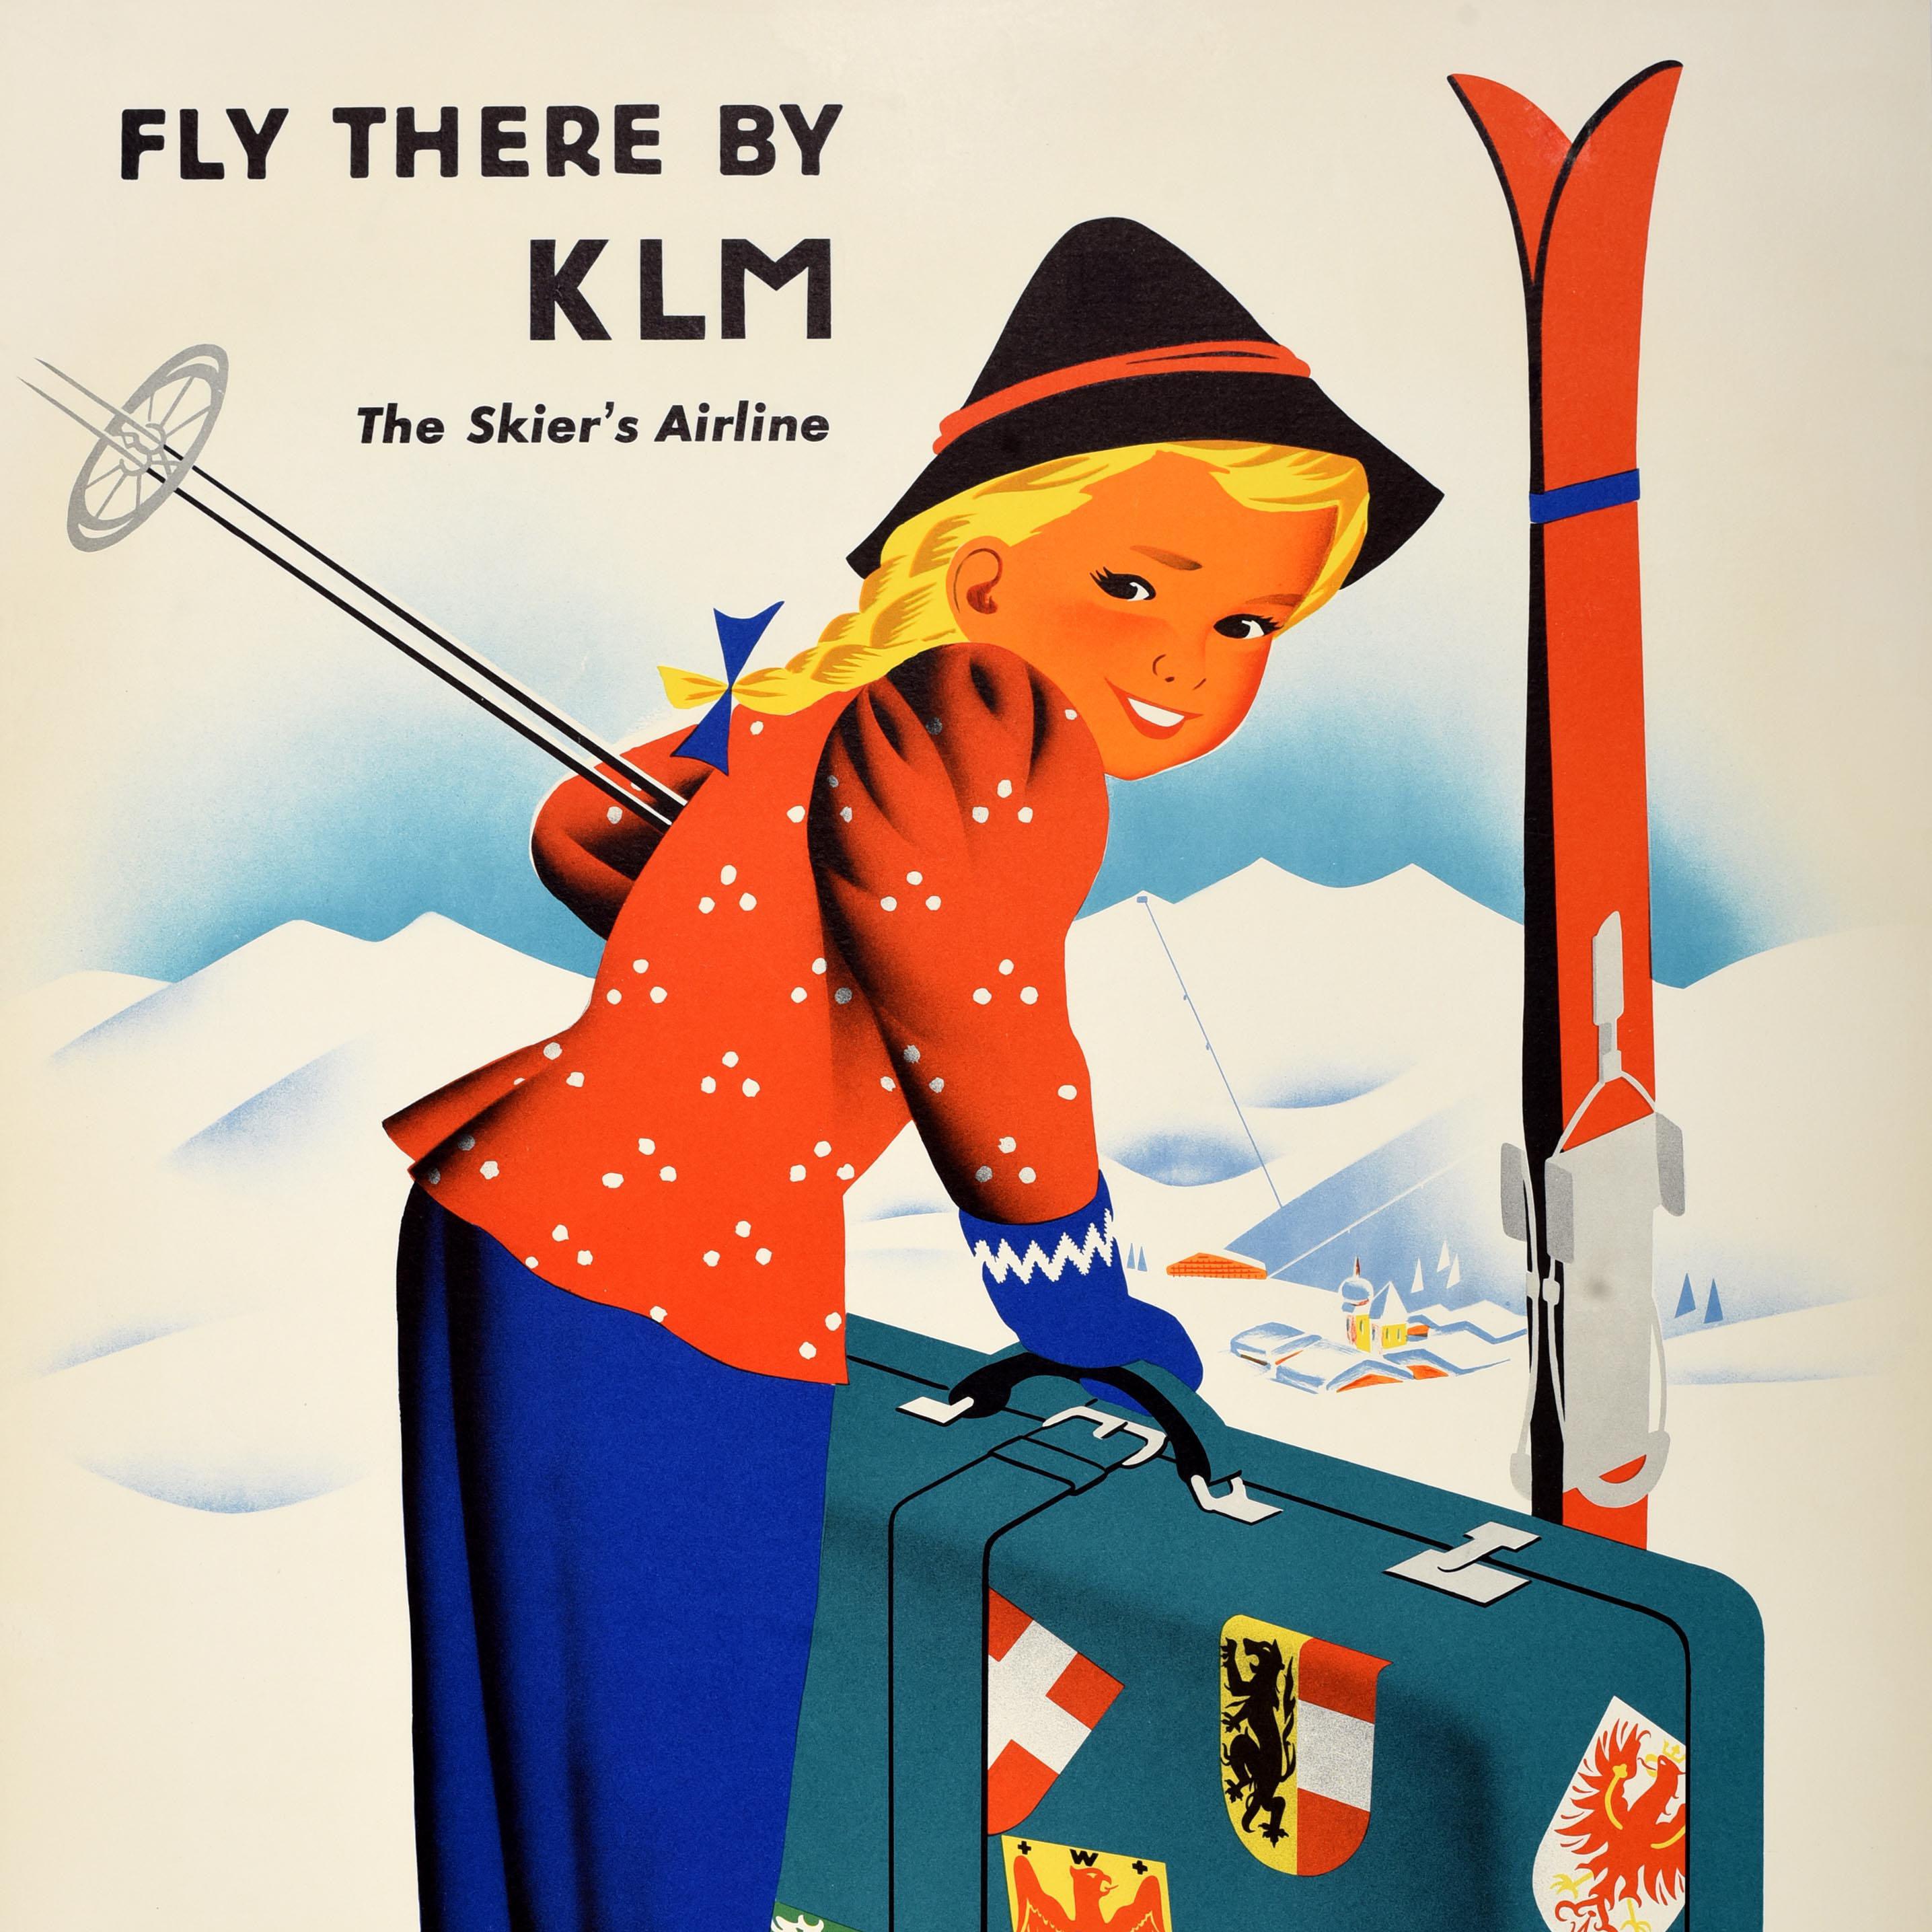 Original vintage ski travel poster - Winter in Austria Fly There by KLM The Skier's Airline - featuring an image of a smiling girl in a traditional hat holding ski poles with her skis next to a large suitcase covered in luggage labels showing the